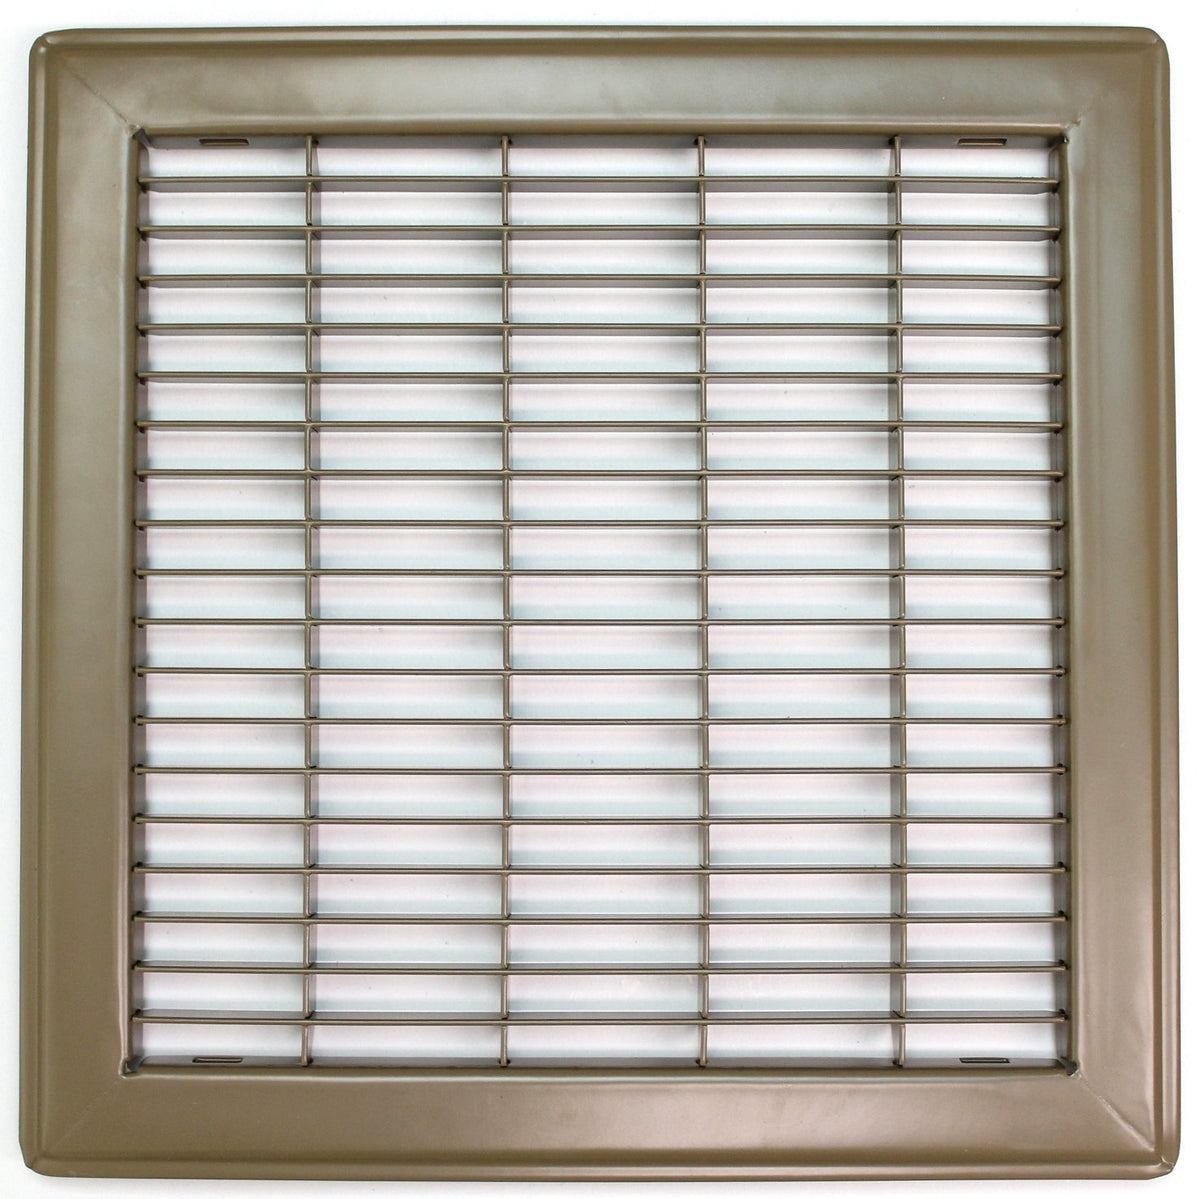 8&quot; X 10&quot; Or 10&quot; X 8&quot; Heavy Duty Floor Grille - Fixed Blades Air Grille - Brown [Outer Dimensions: 9.75 X 11.75]